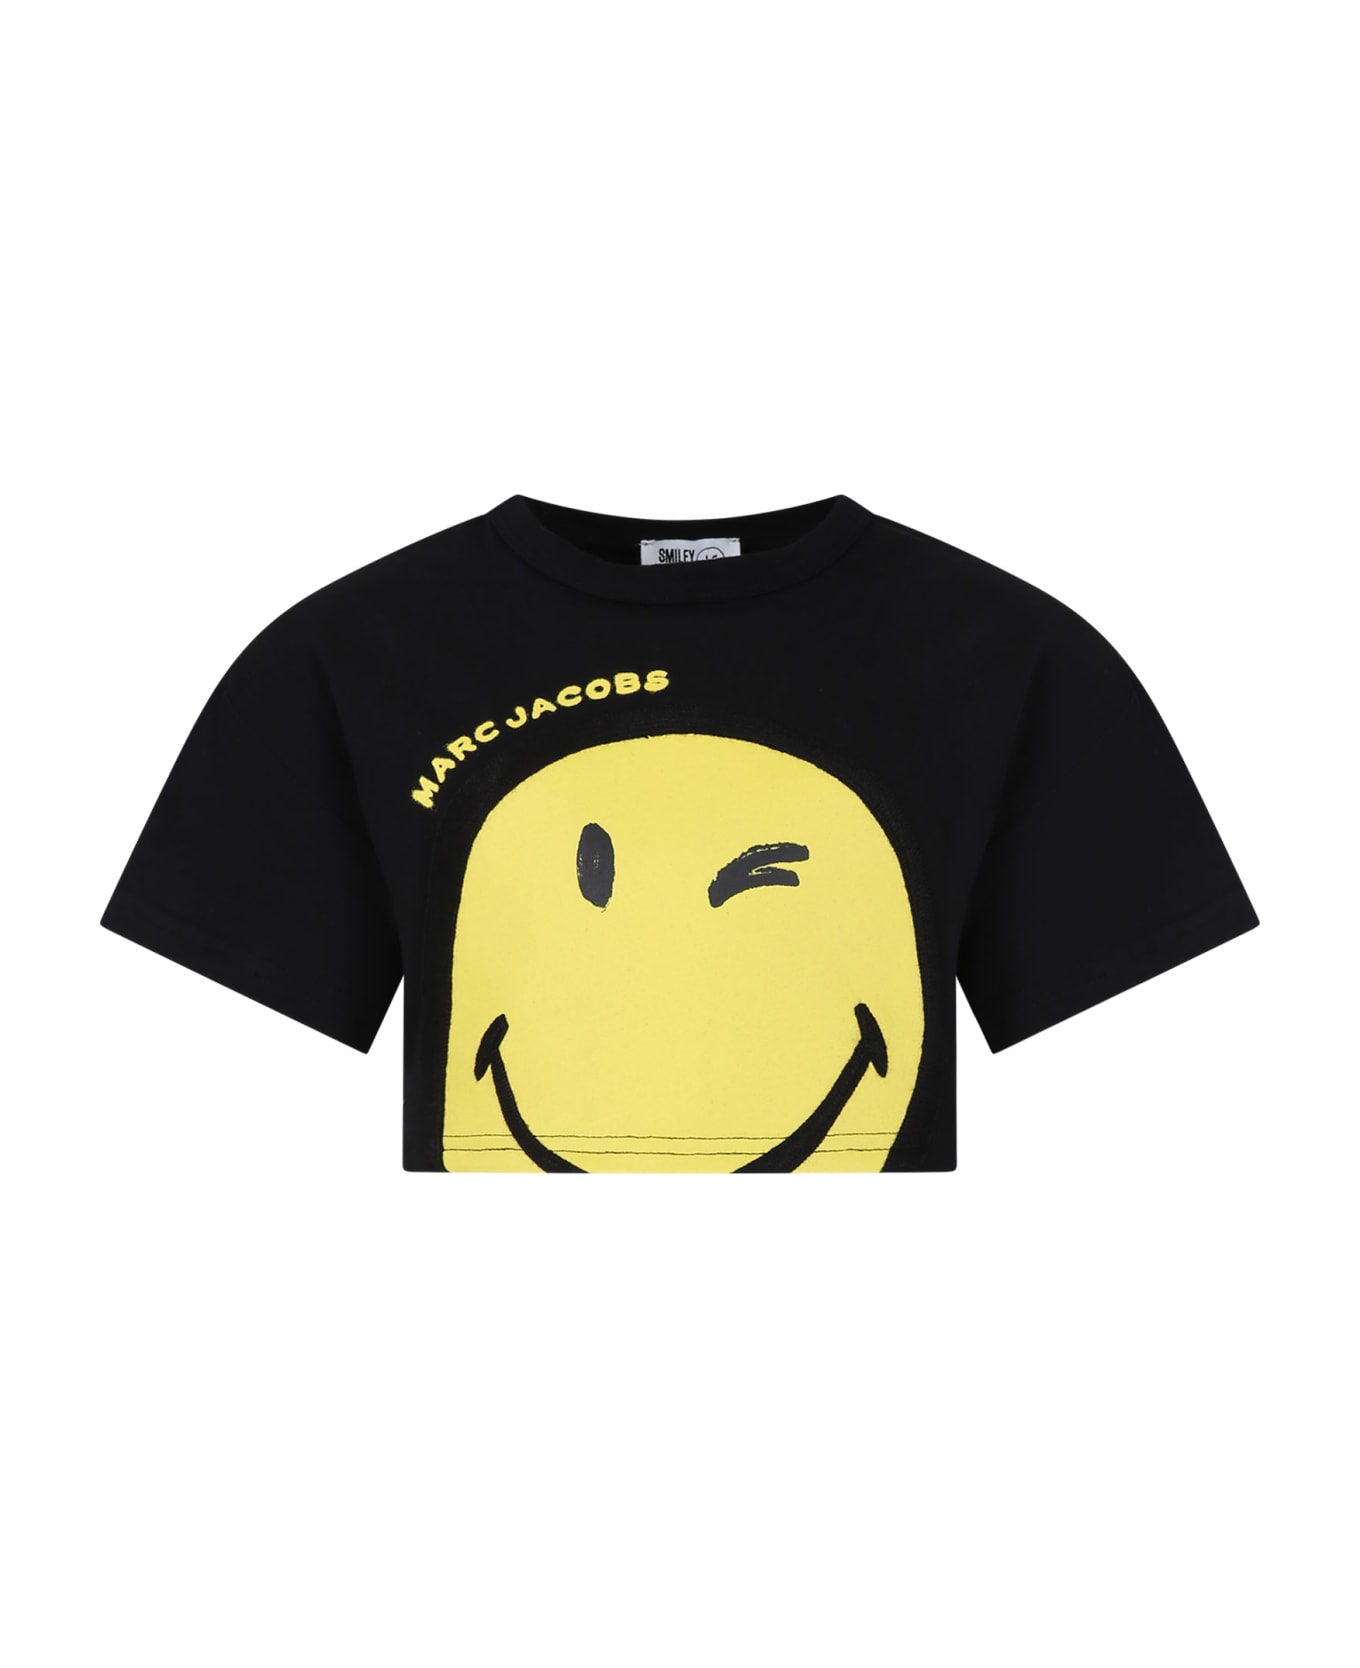 Marc Jacobs Black T-shirt For Girl With Smiley And Logo - Black